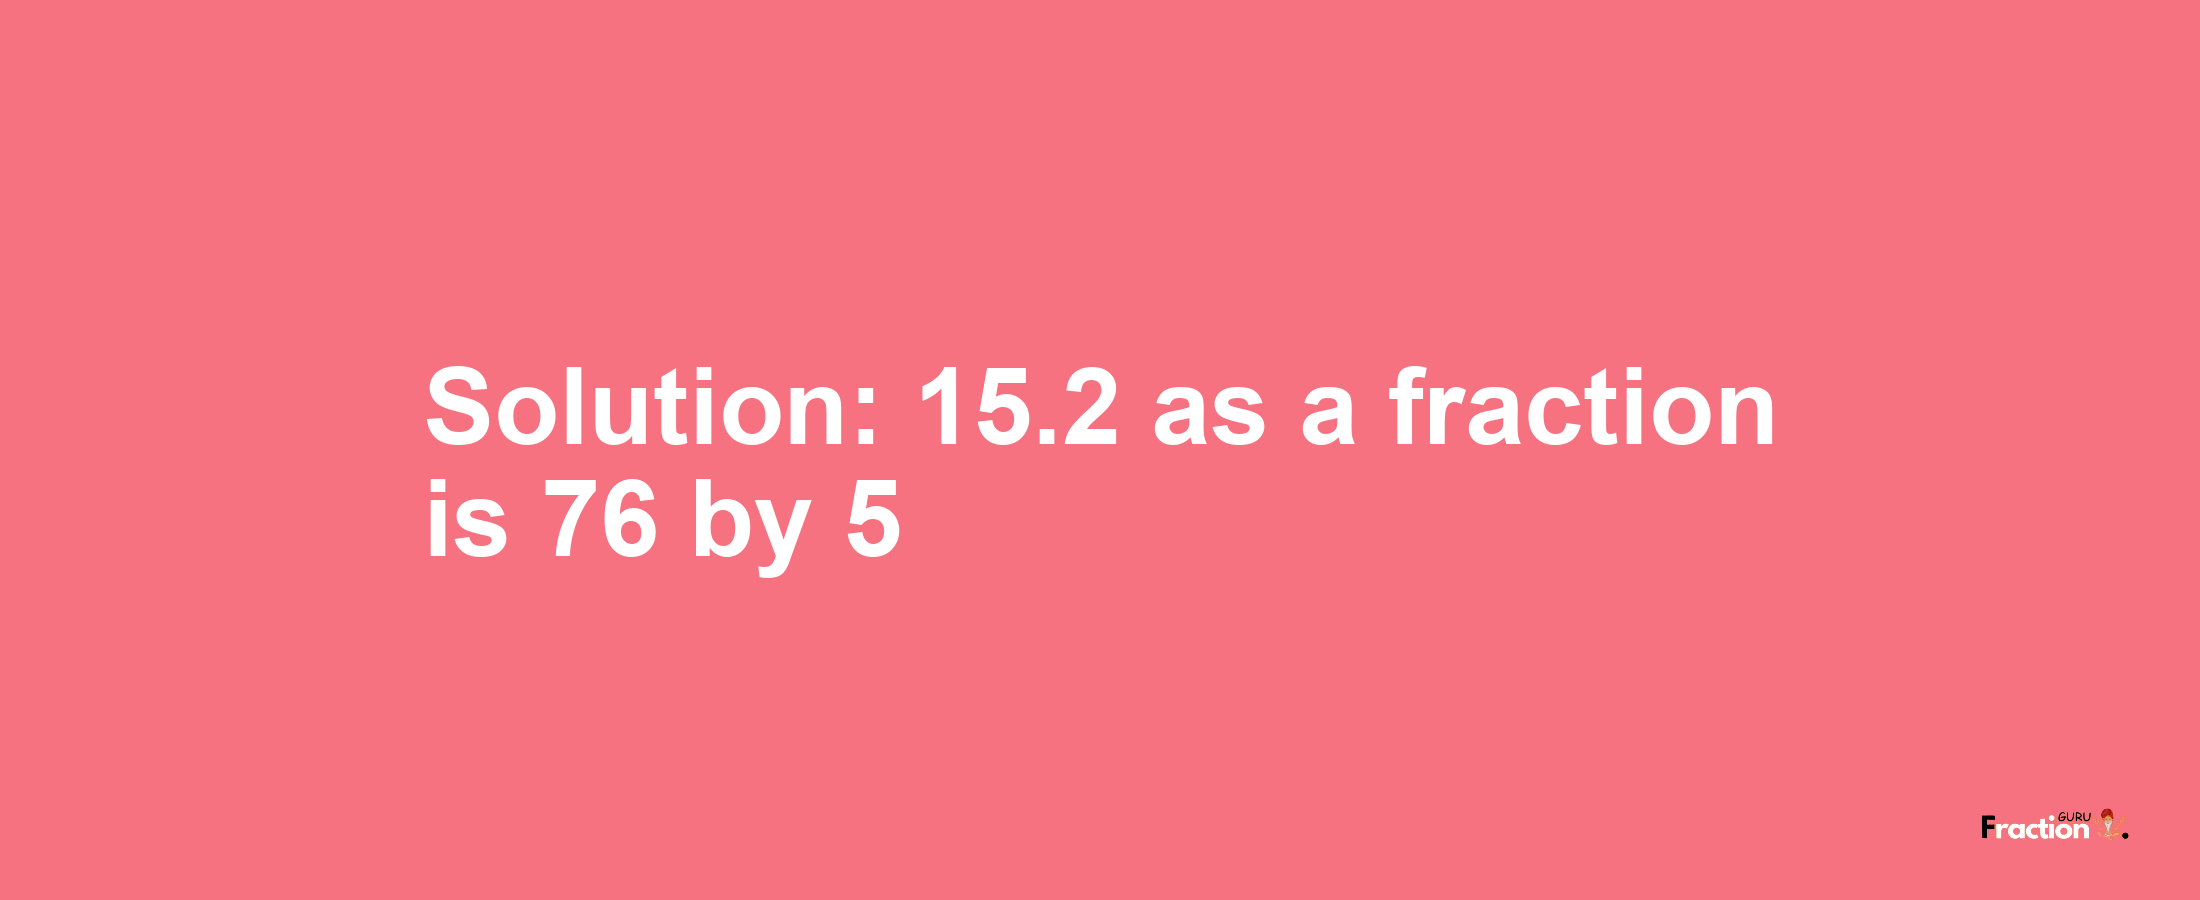 Solution:15.2 as a fraction is 76/5